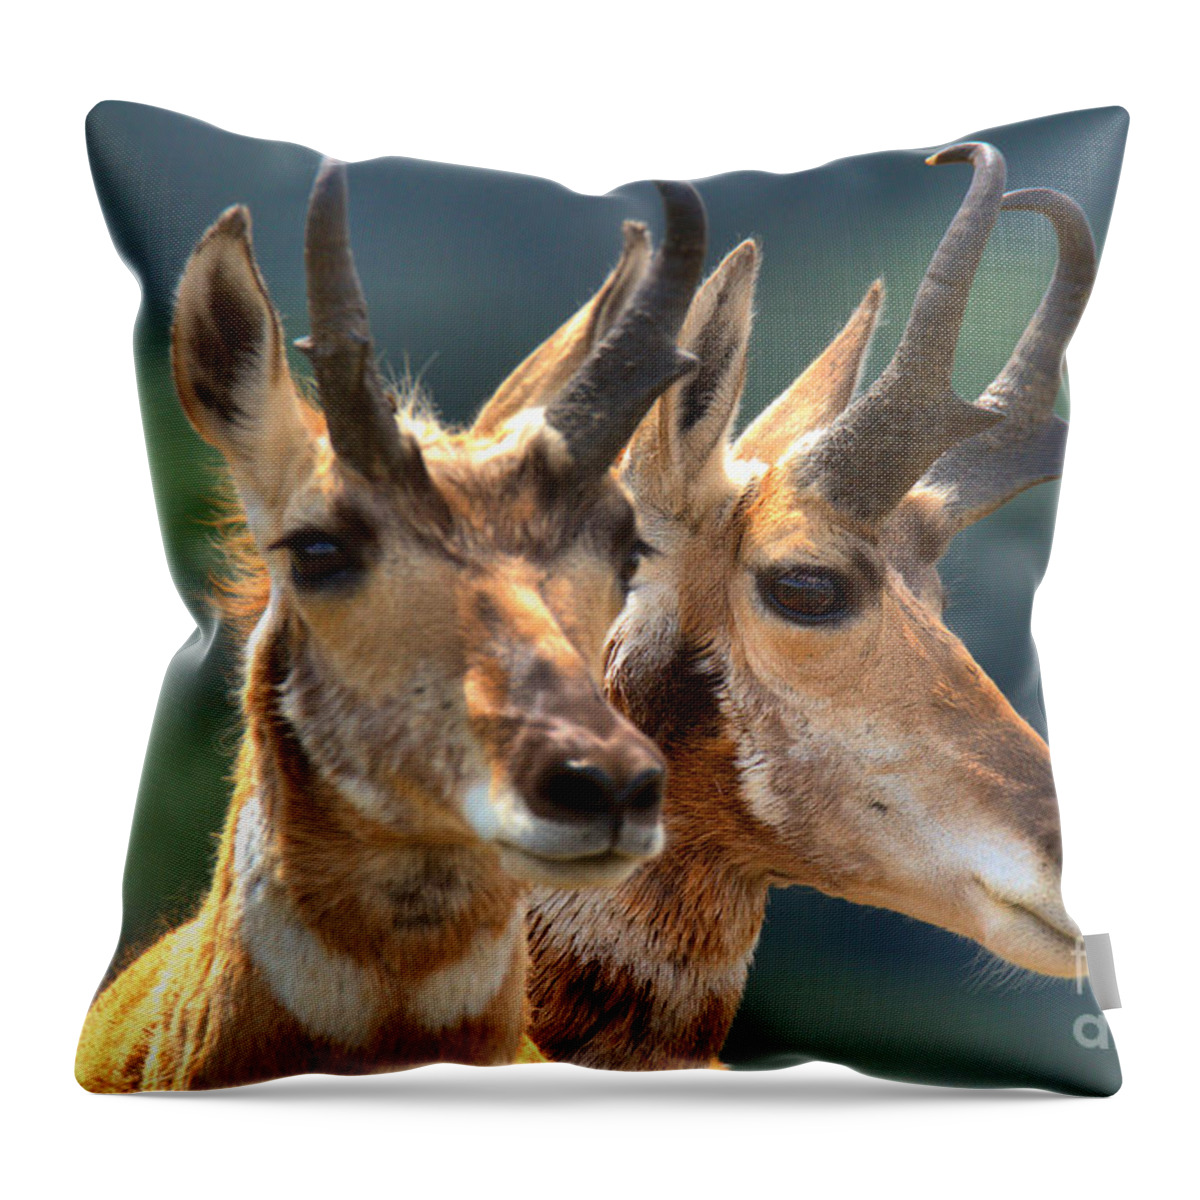 Pronghorn Throw Pillow featuring the photograph Pronghorn Antelope Pair by Adam Jewell